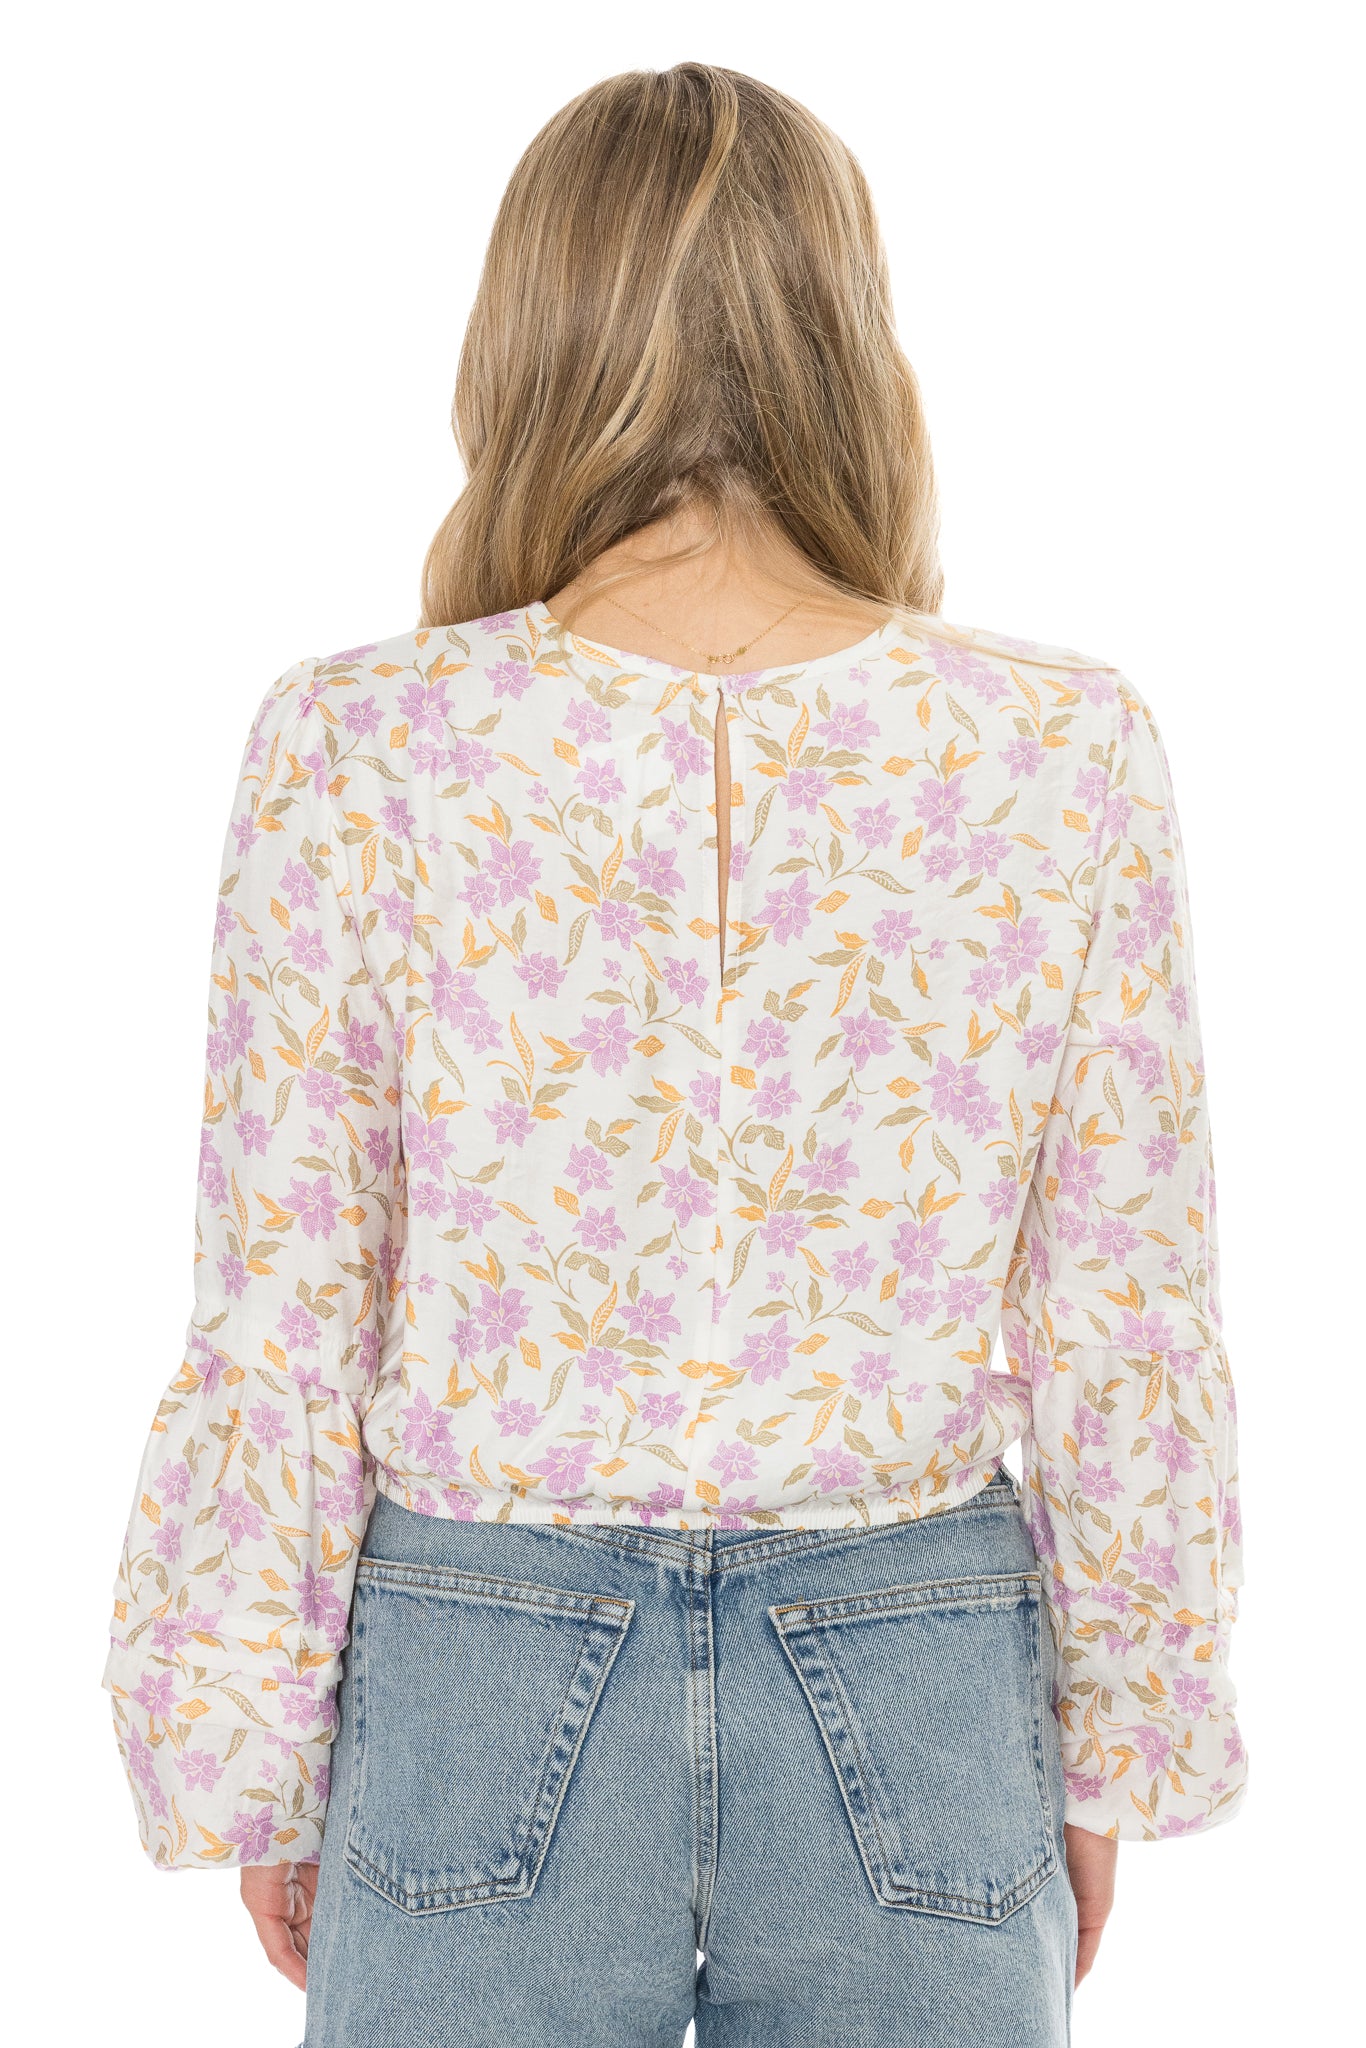 Nylah Floral Top by Z Supply